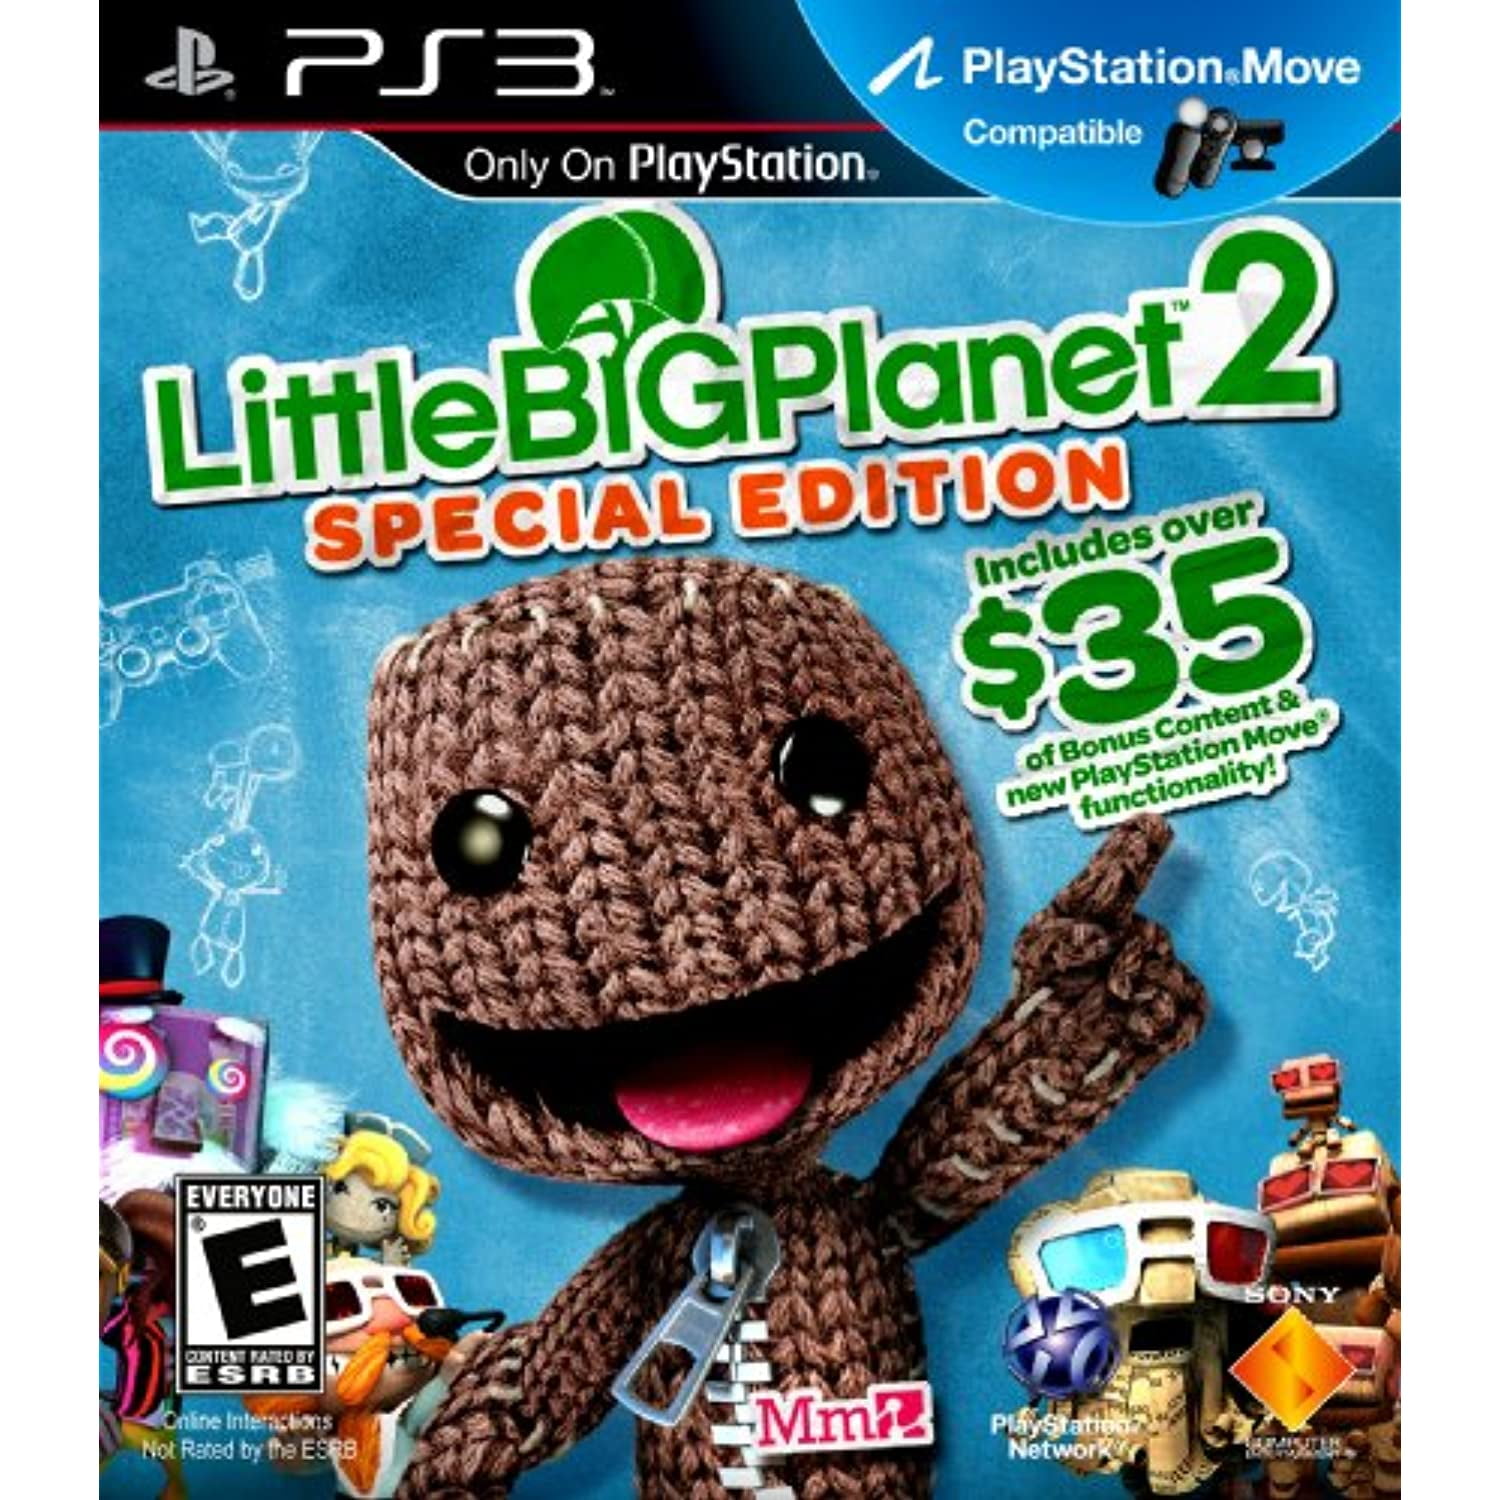 hul Marco Polo markedsføring Ps3 Little Big Planet 2 Special Edition - Walmart.com